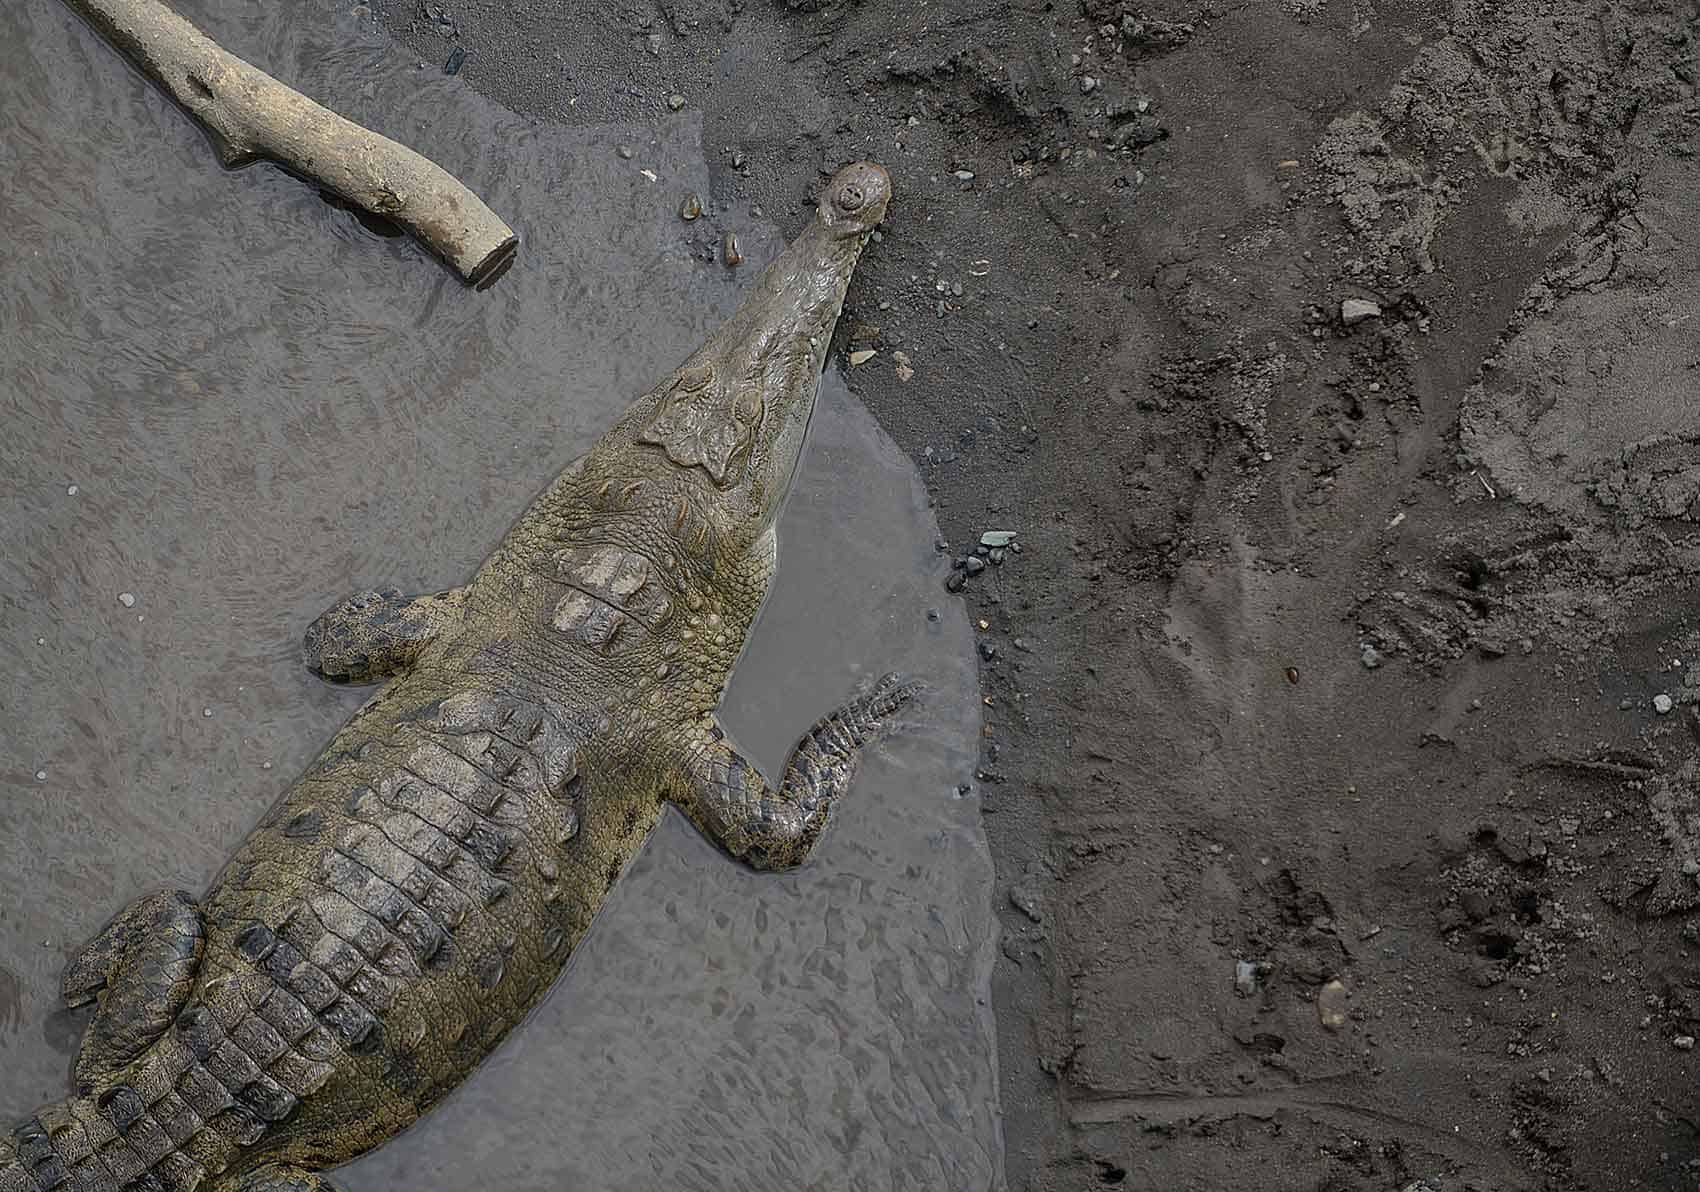 The Tamarindo Development Association and the Environment Ministry have developed a plan to prevent future crocodile attacks in the area.